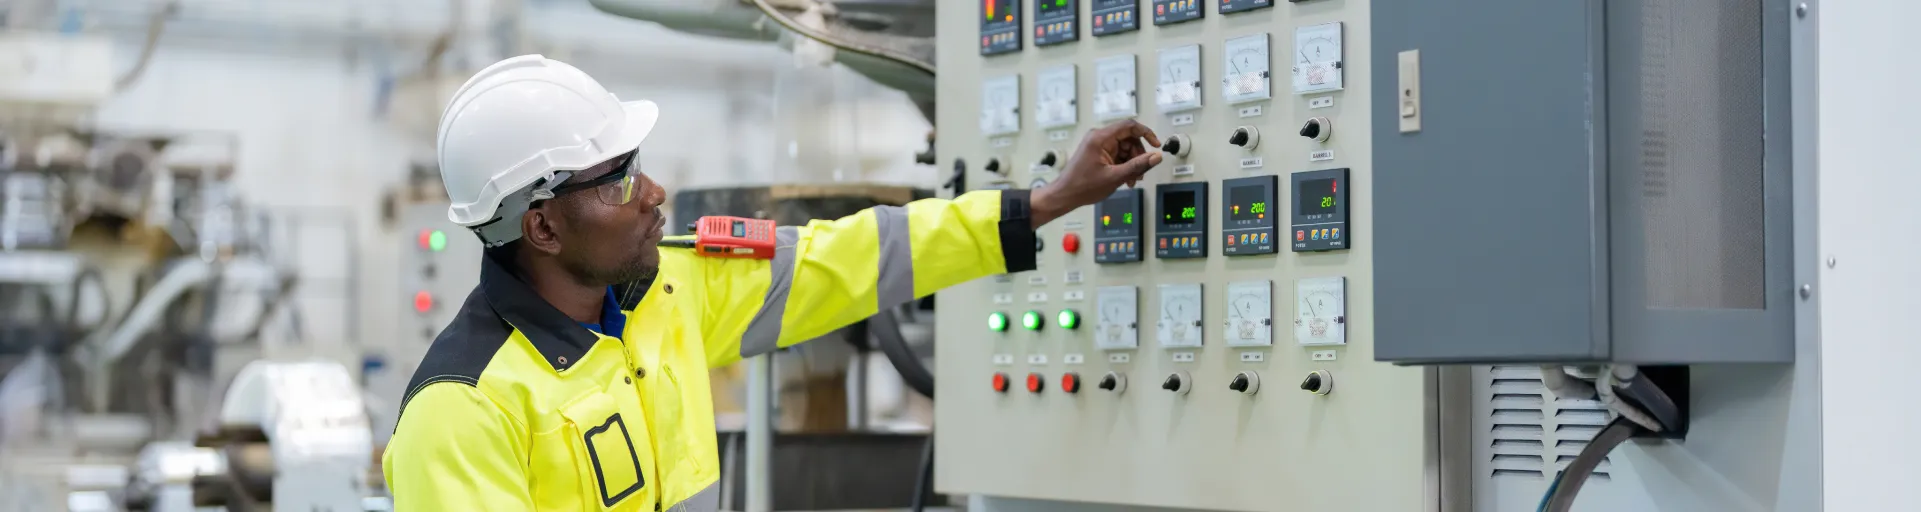 Engineer in a factory turning a knob, wearing reflective clothing and holding a clipboard